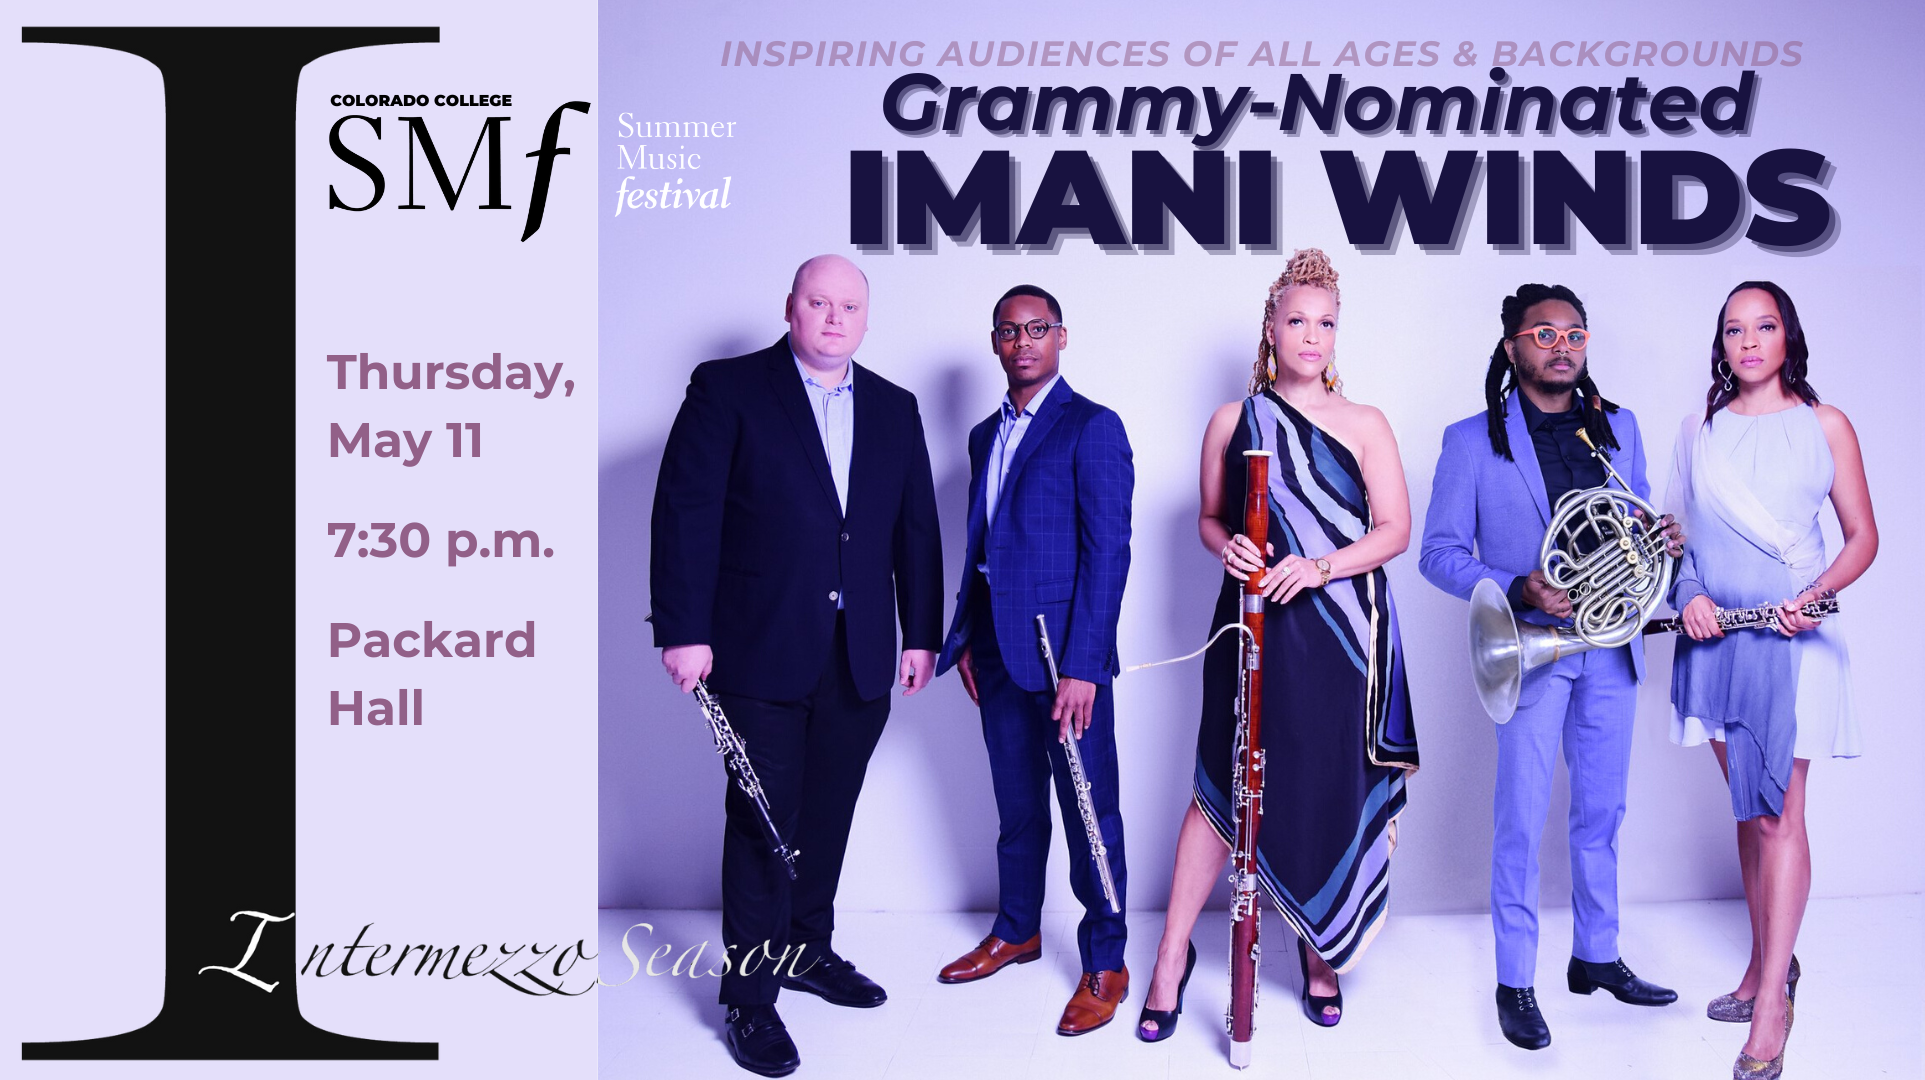 SMF-Intermezzo-Imani-Winds-5-5-23-updated-as-Grammy-Nominated.png